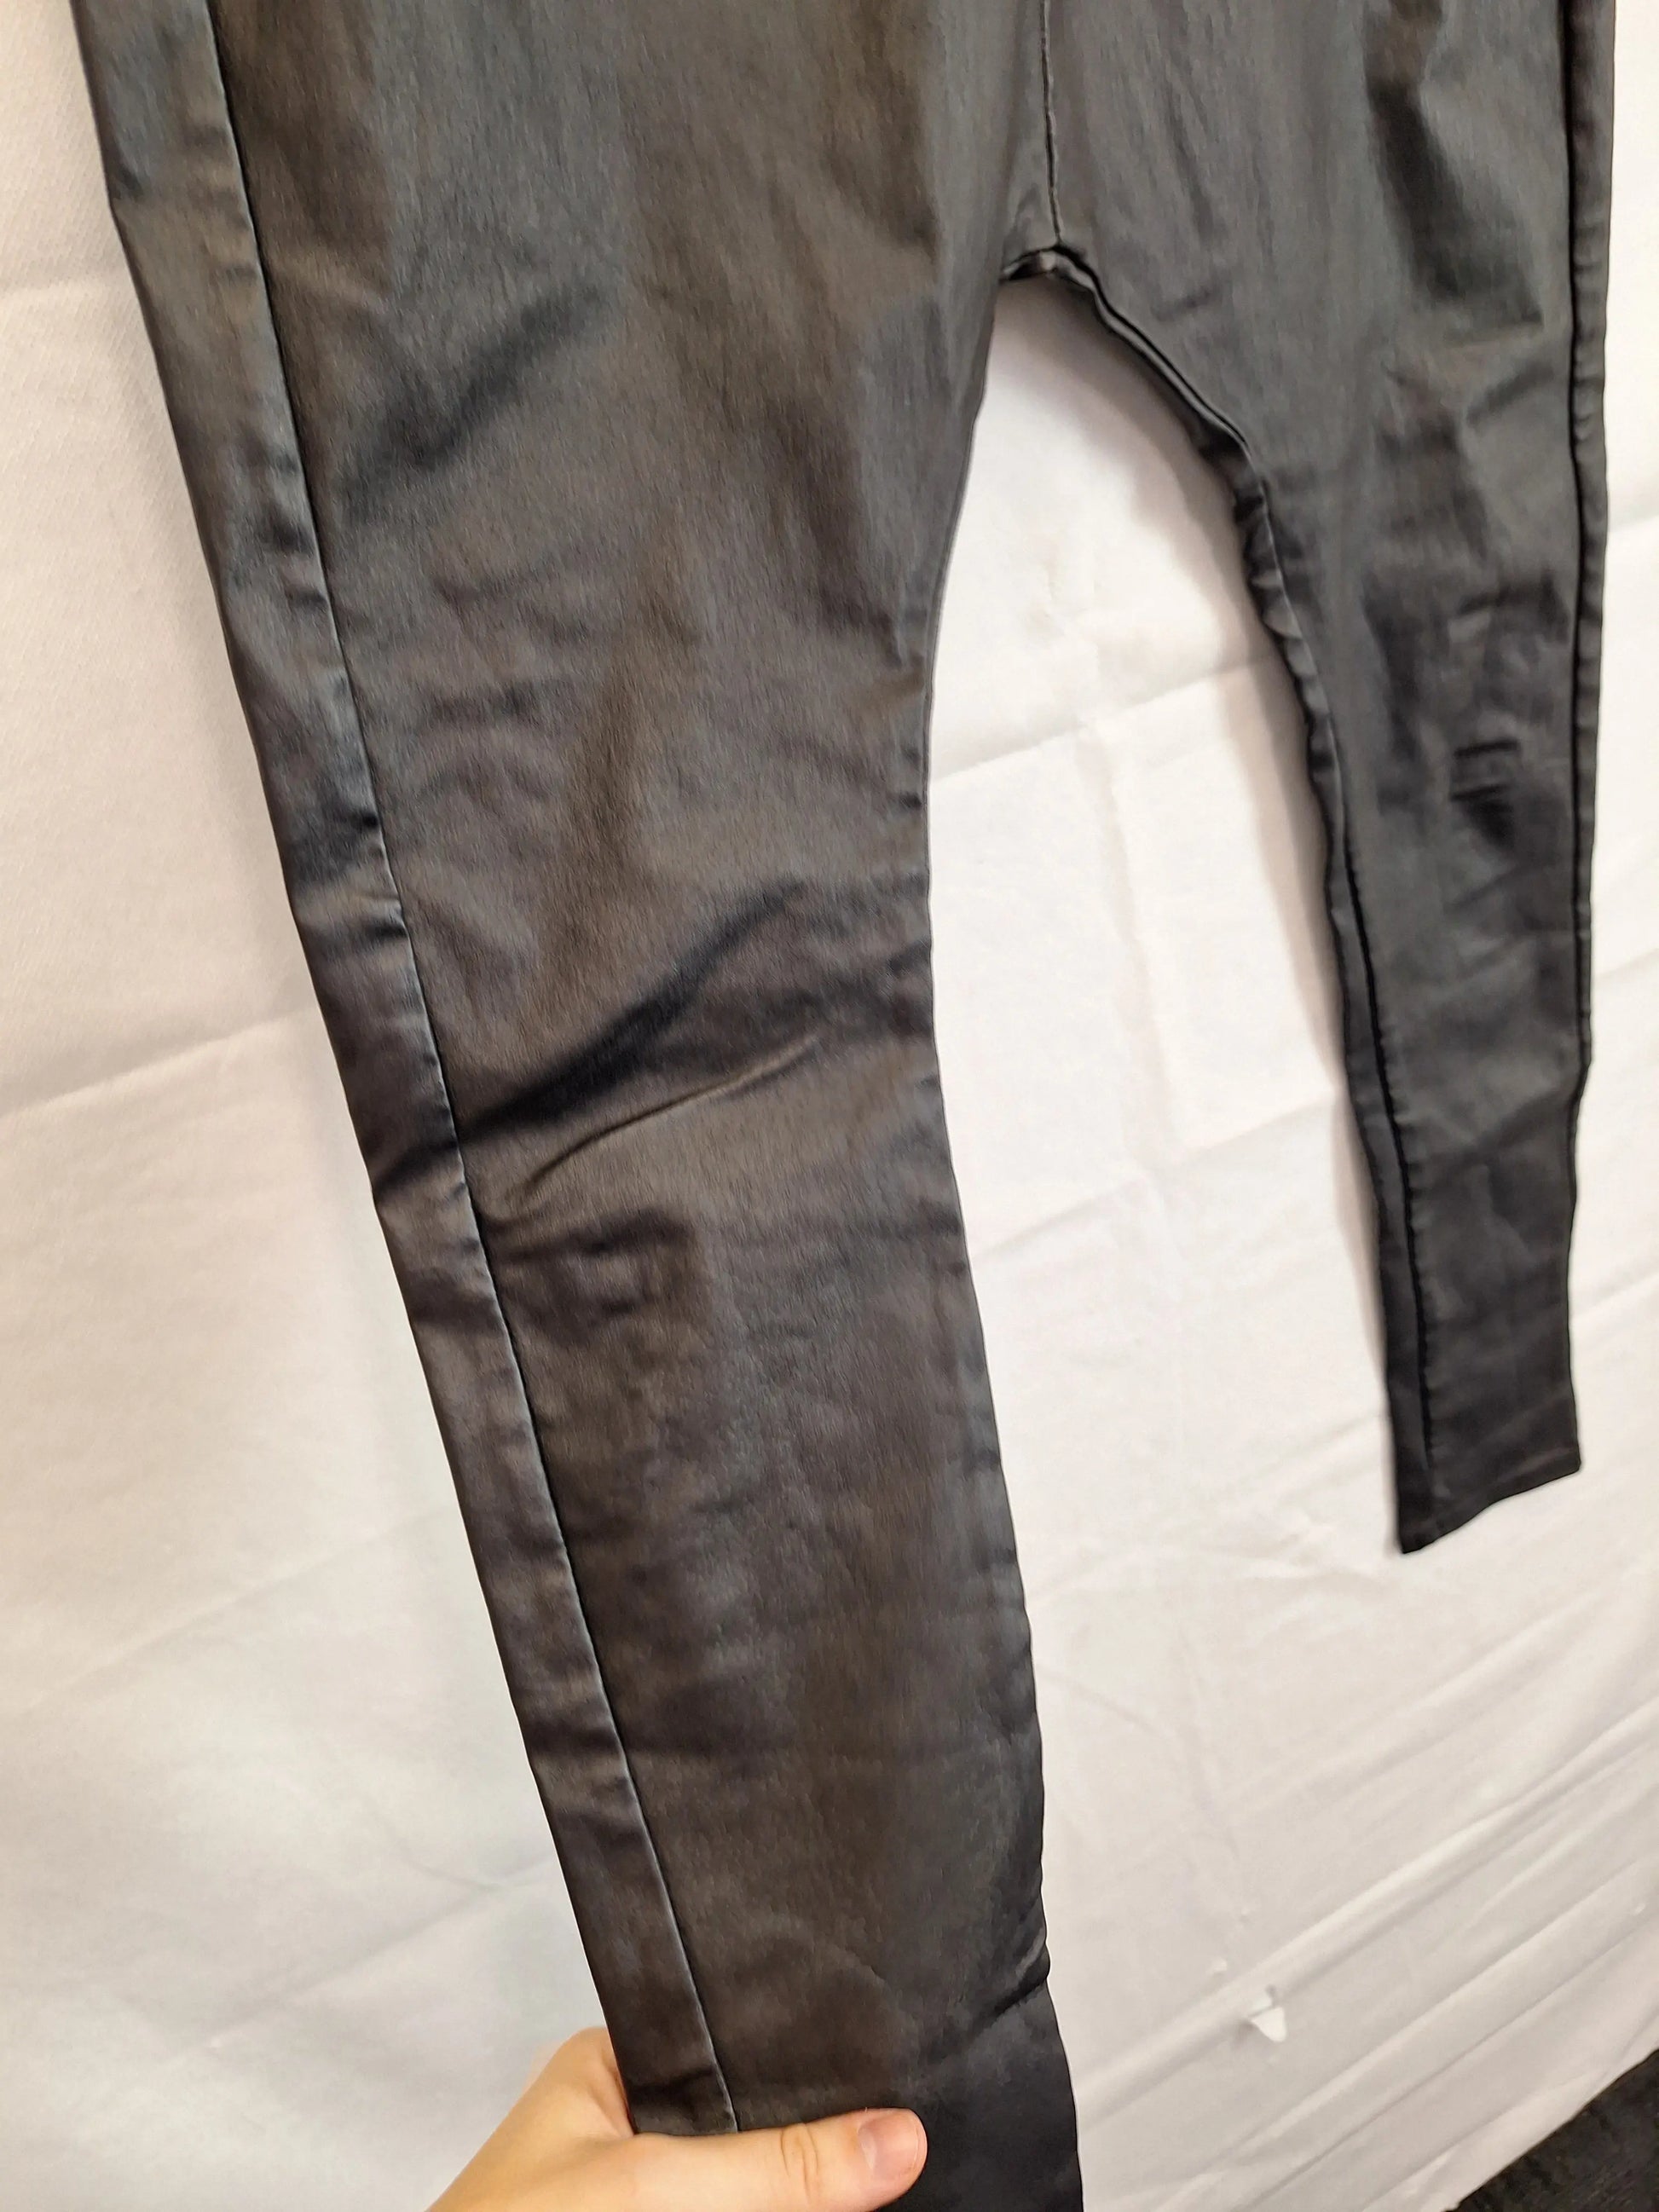 Decjuba Stylish Drop Waist Faux Leather Pants Size 6 by SwapUp-Online Second Hand Store-Online Thrift Store